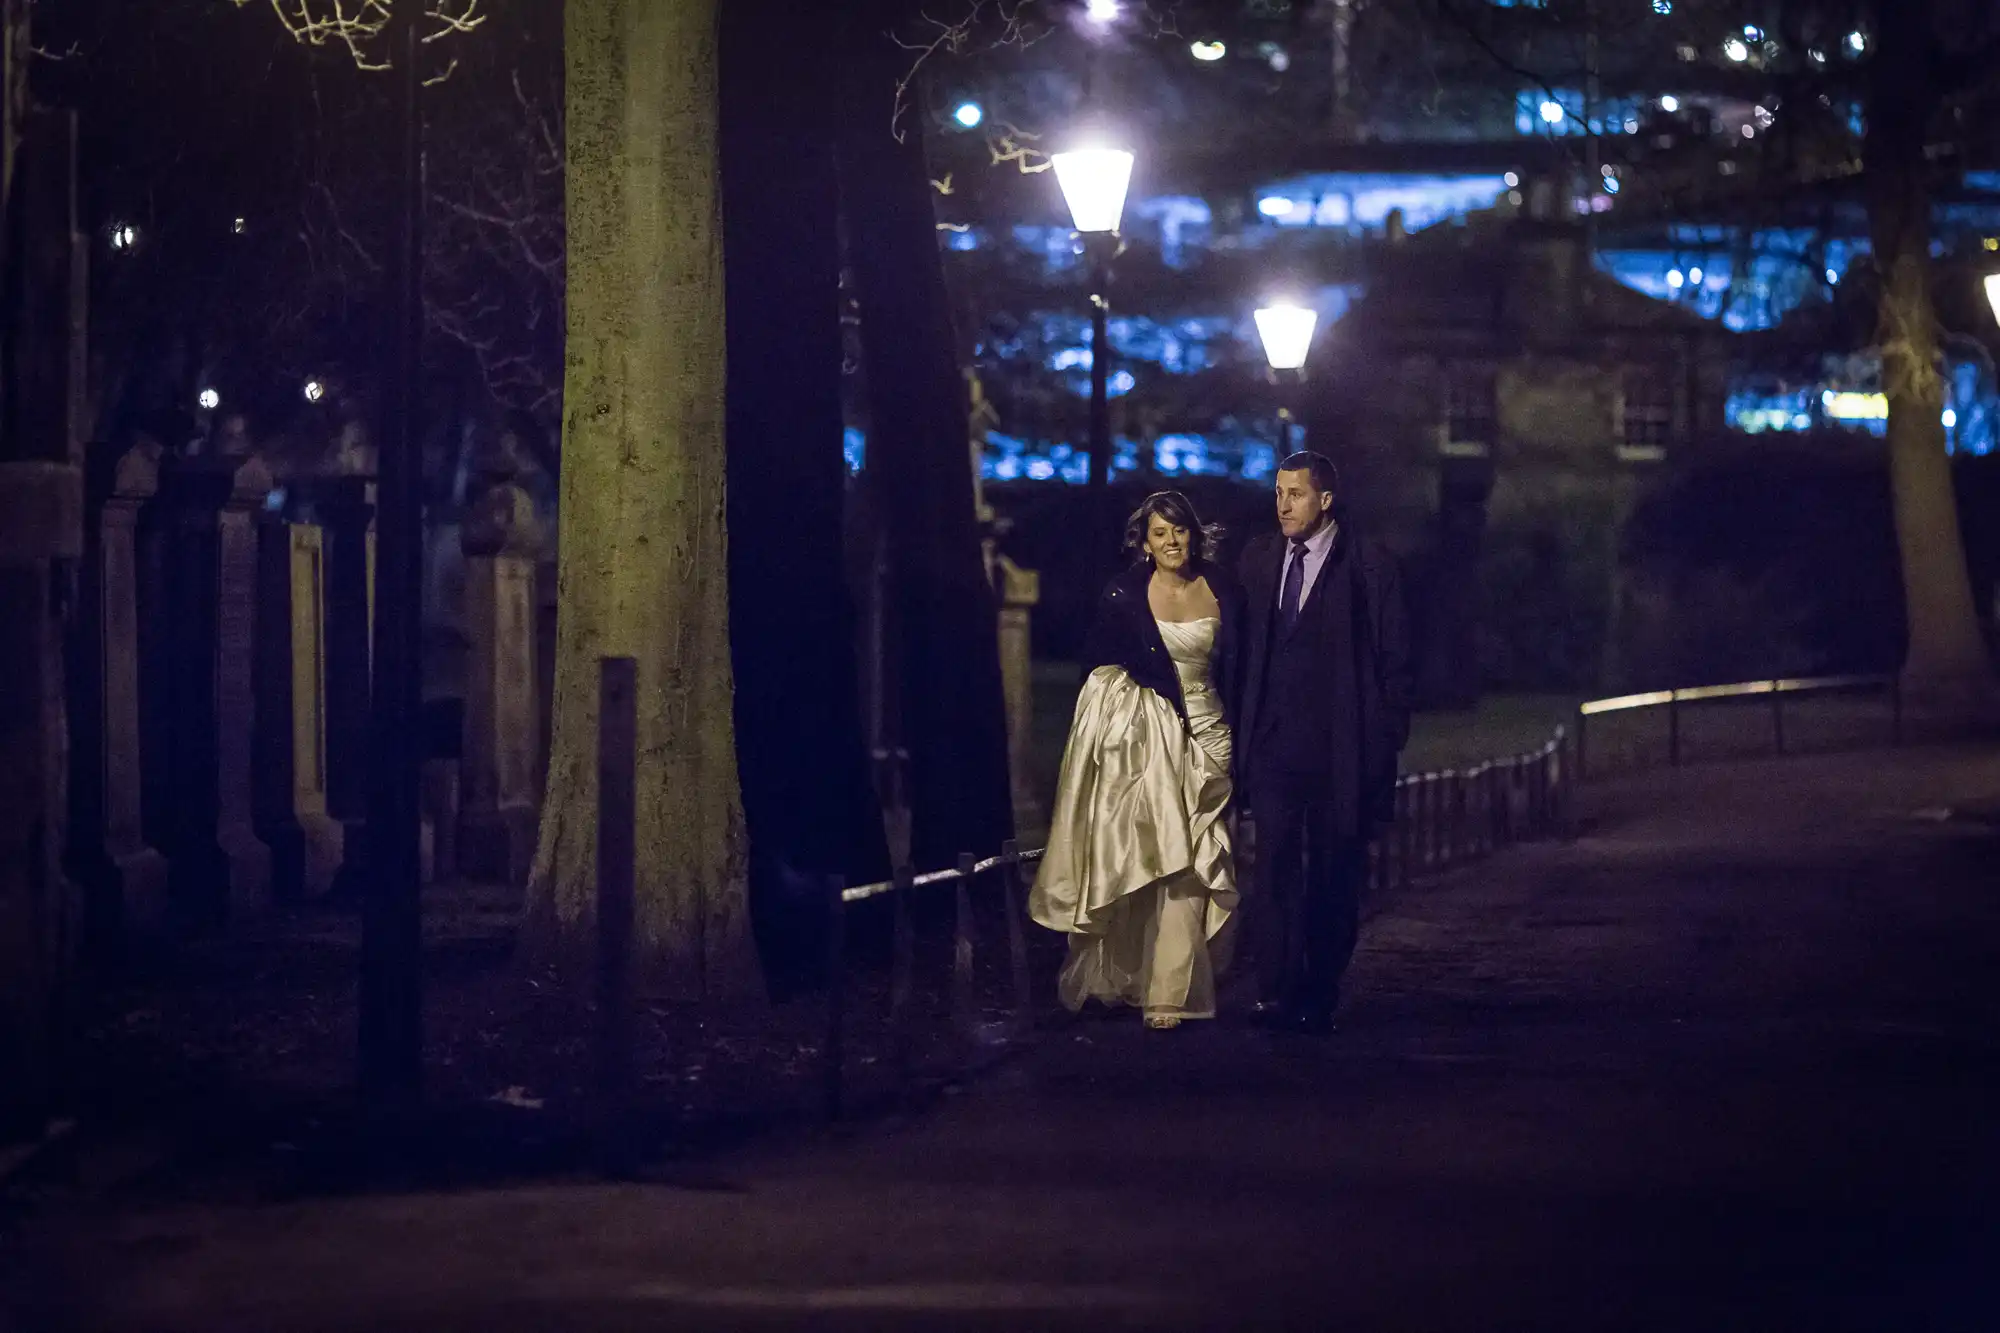 A couple in formal attire walking at night along a lamp-lit park path, with dim city lights visible in the background.